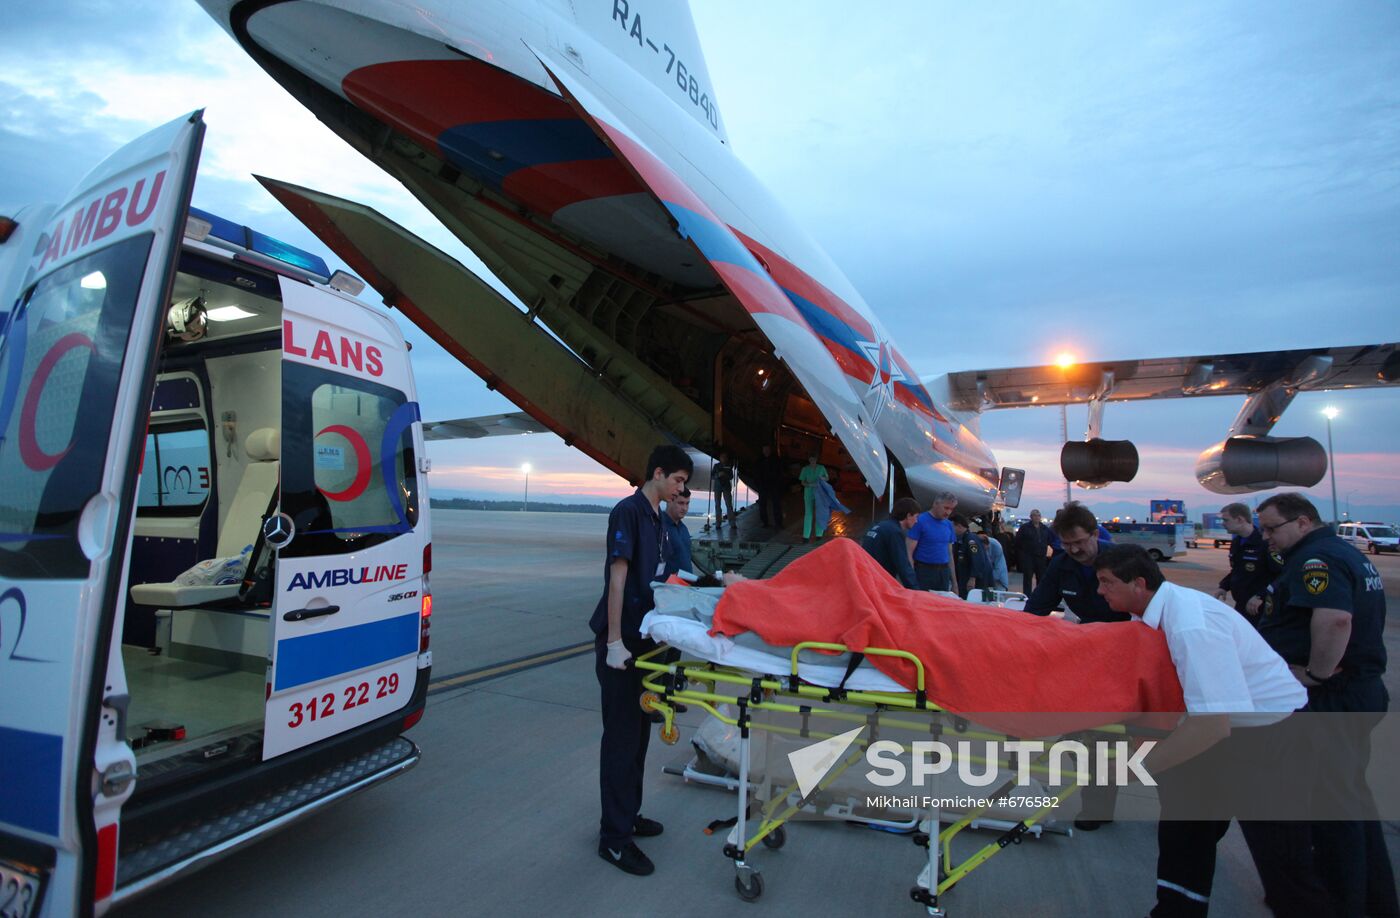 Transfer of Russian tourists injured in Antalya to Moscow